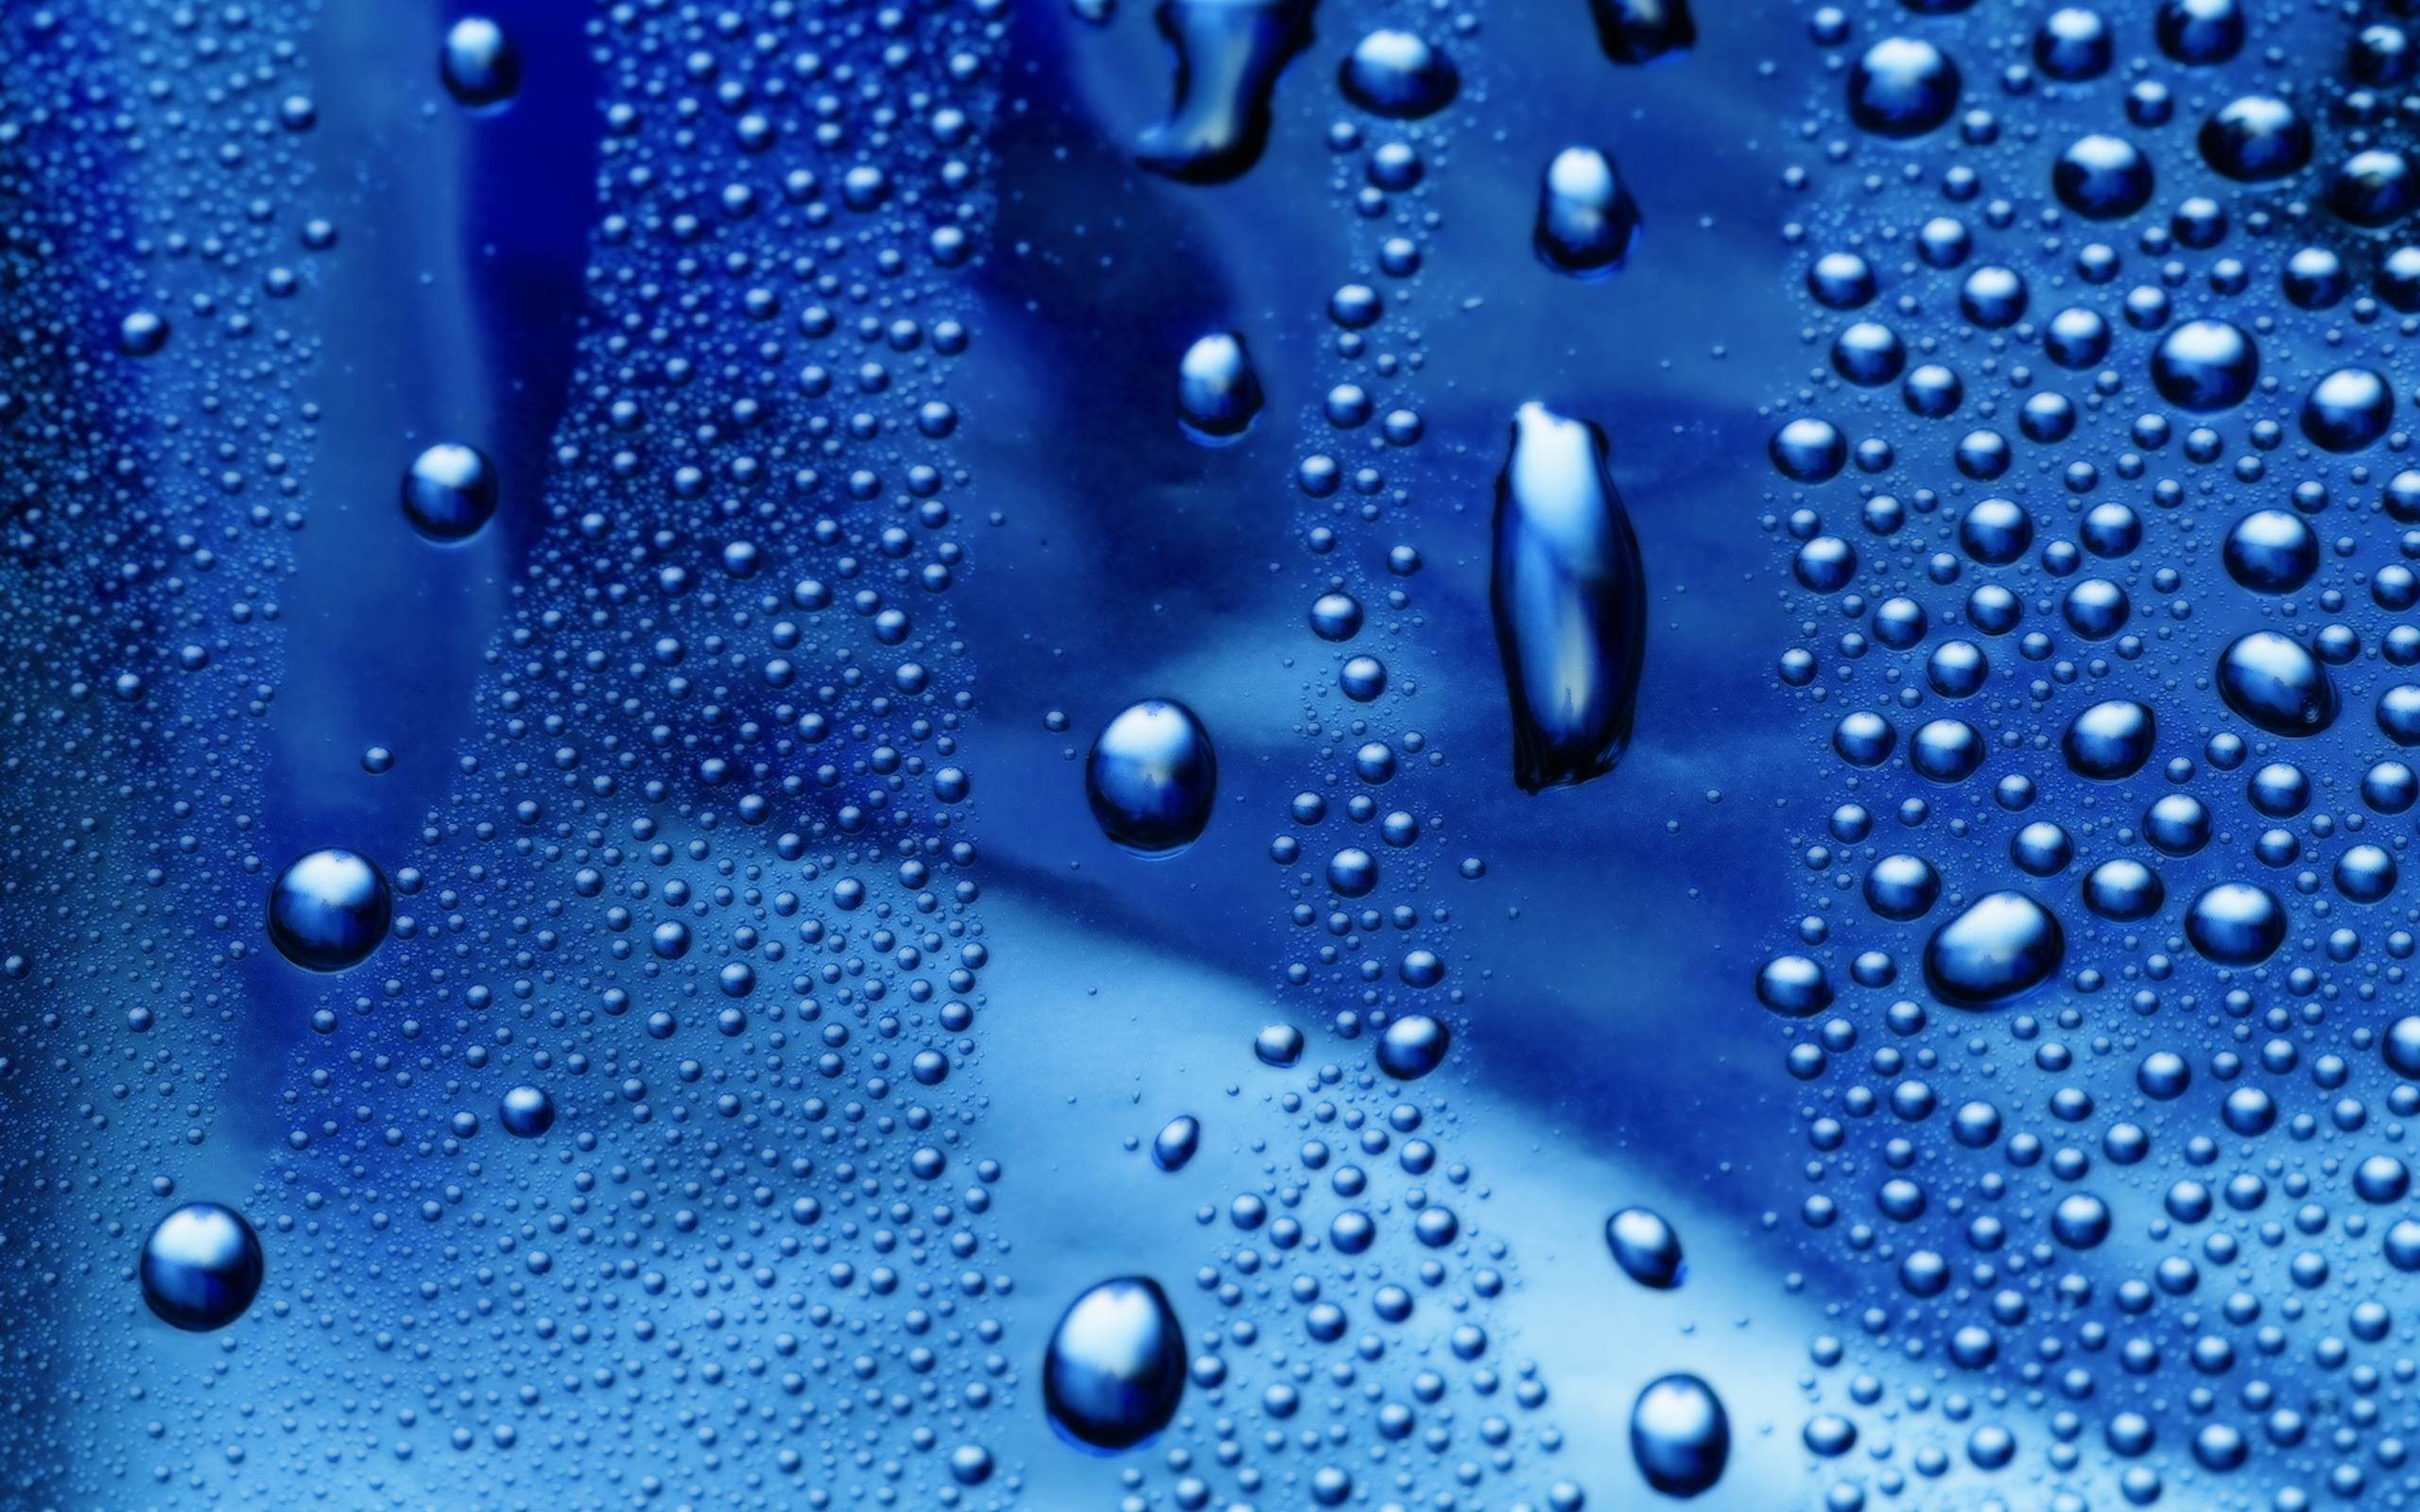 HD wallpaper glass with water drops Water On Glass water droplets rain   Wallpaper Flare